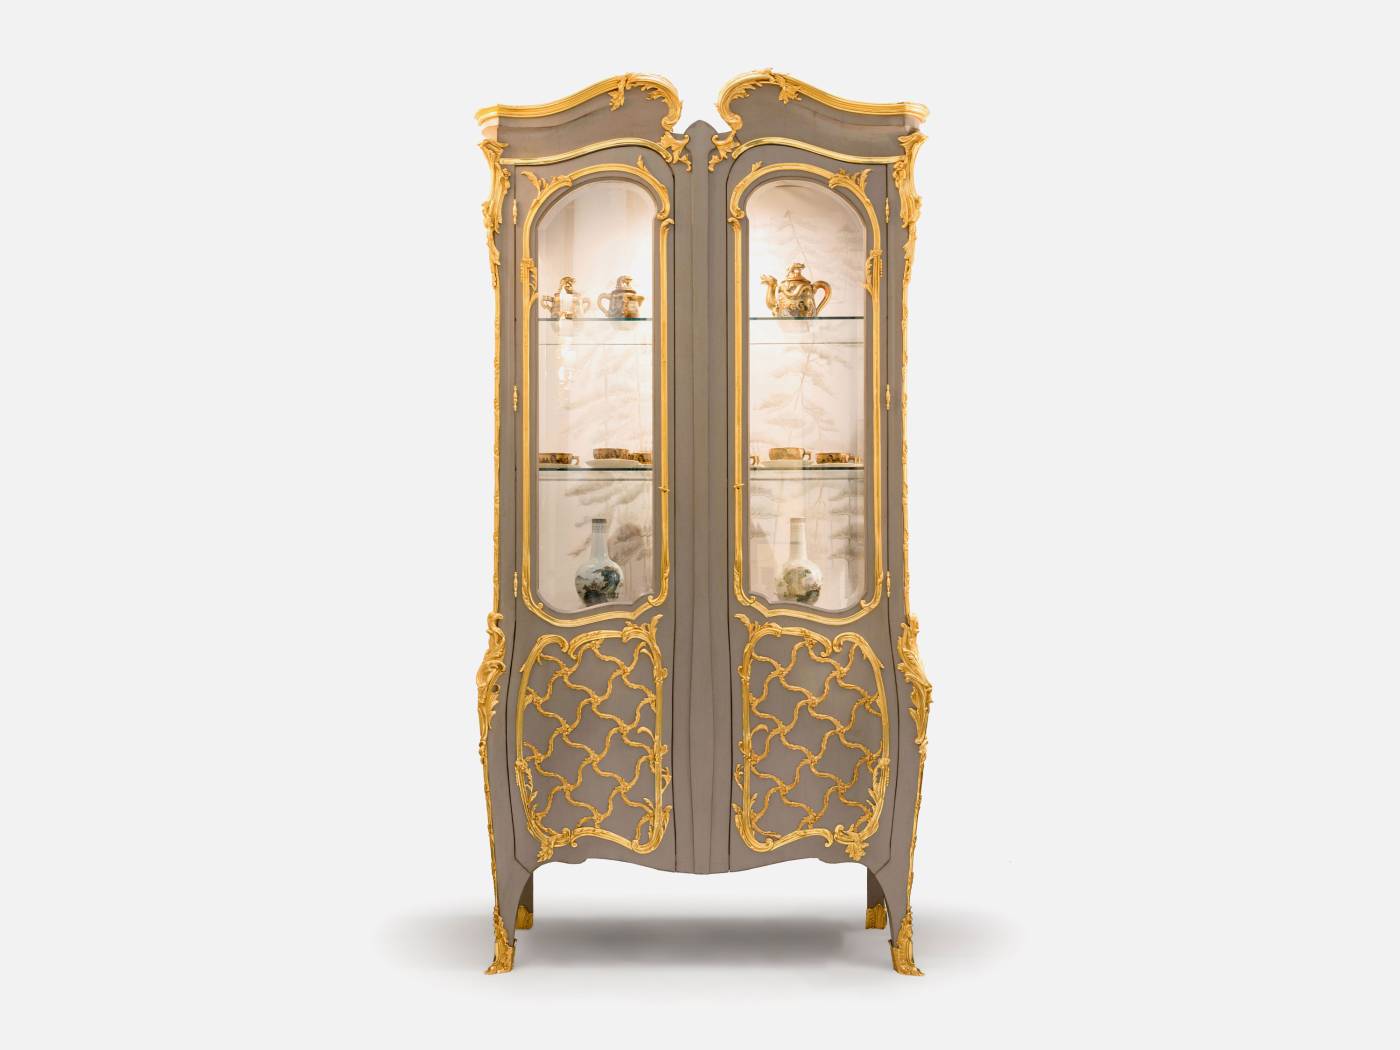 ART. 709-19 – The elegance of luxury classic Showcases and Bookcases made in Italy by C.G. Capelletti.